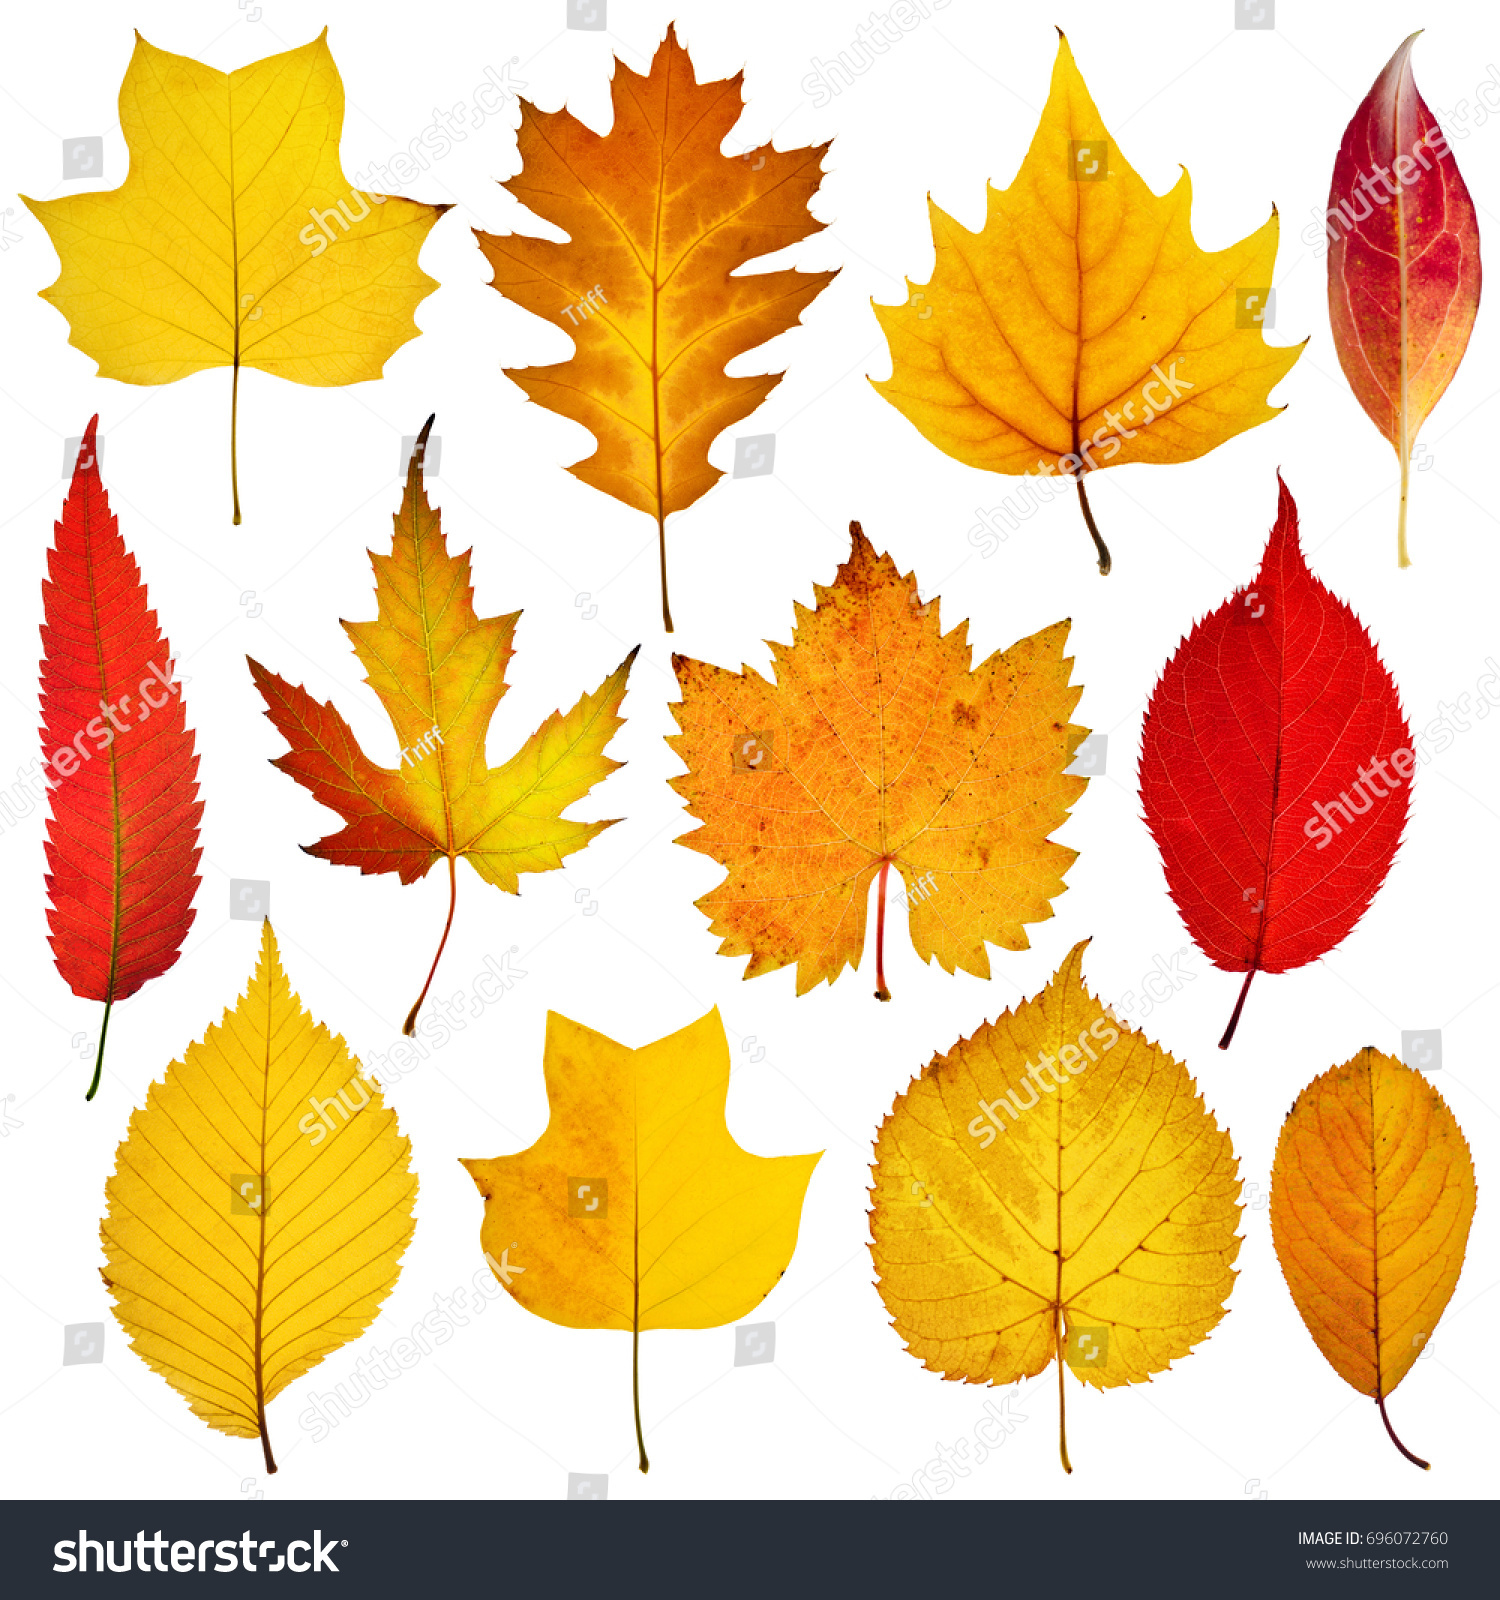 collection beautiful colorful autumn leaves isolated on white background #696072760